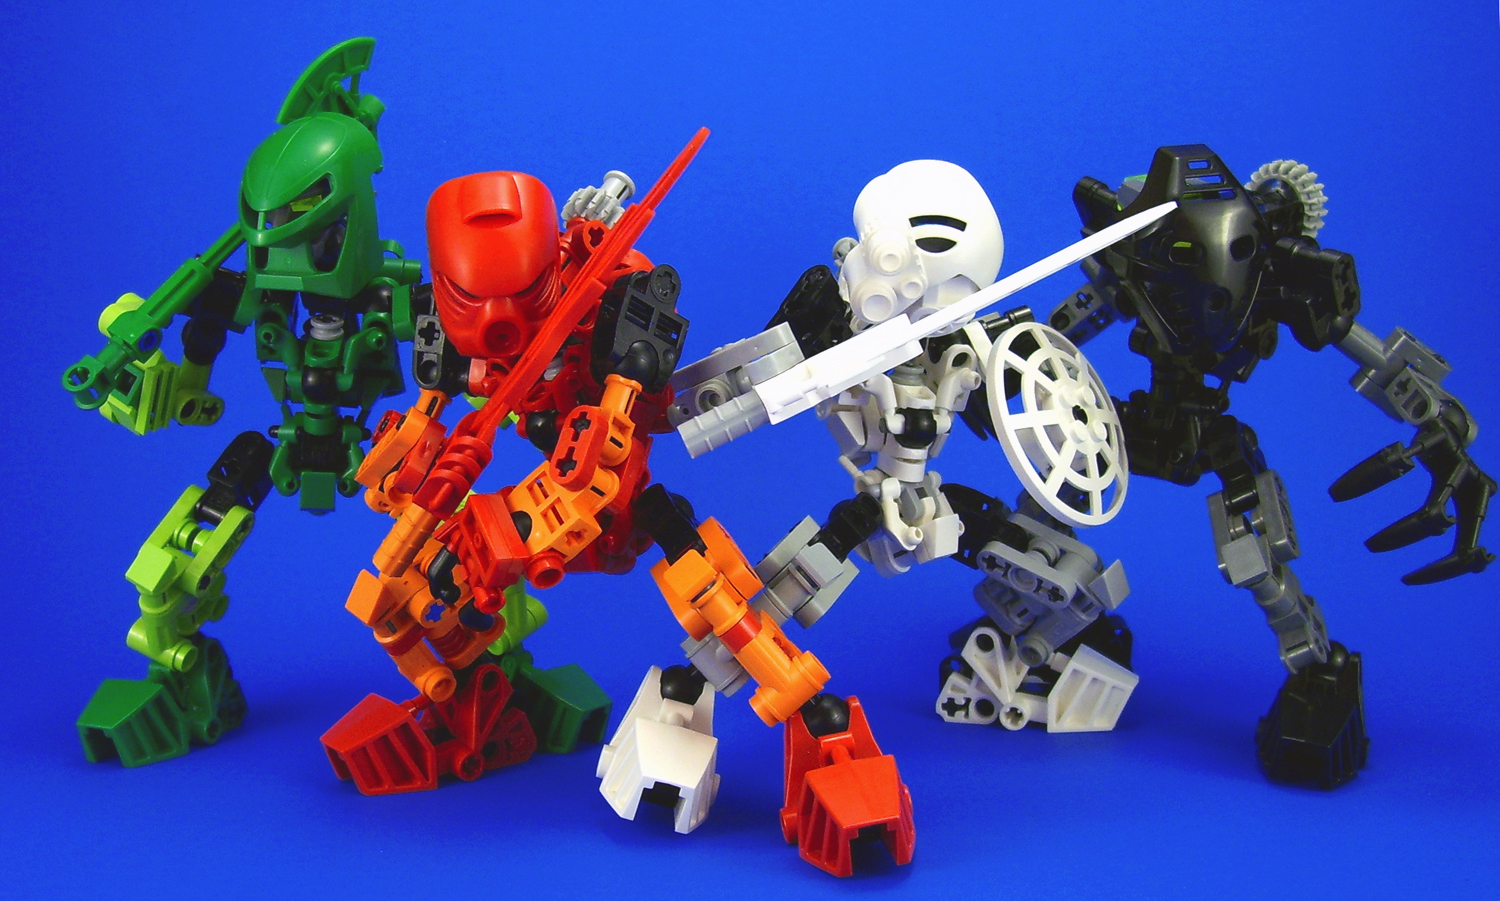 Bionicle 4 Toa by Lalam24 on DeviantArt